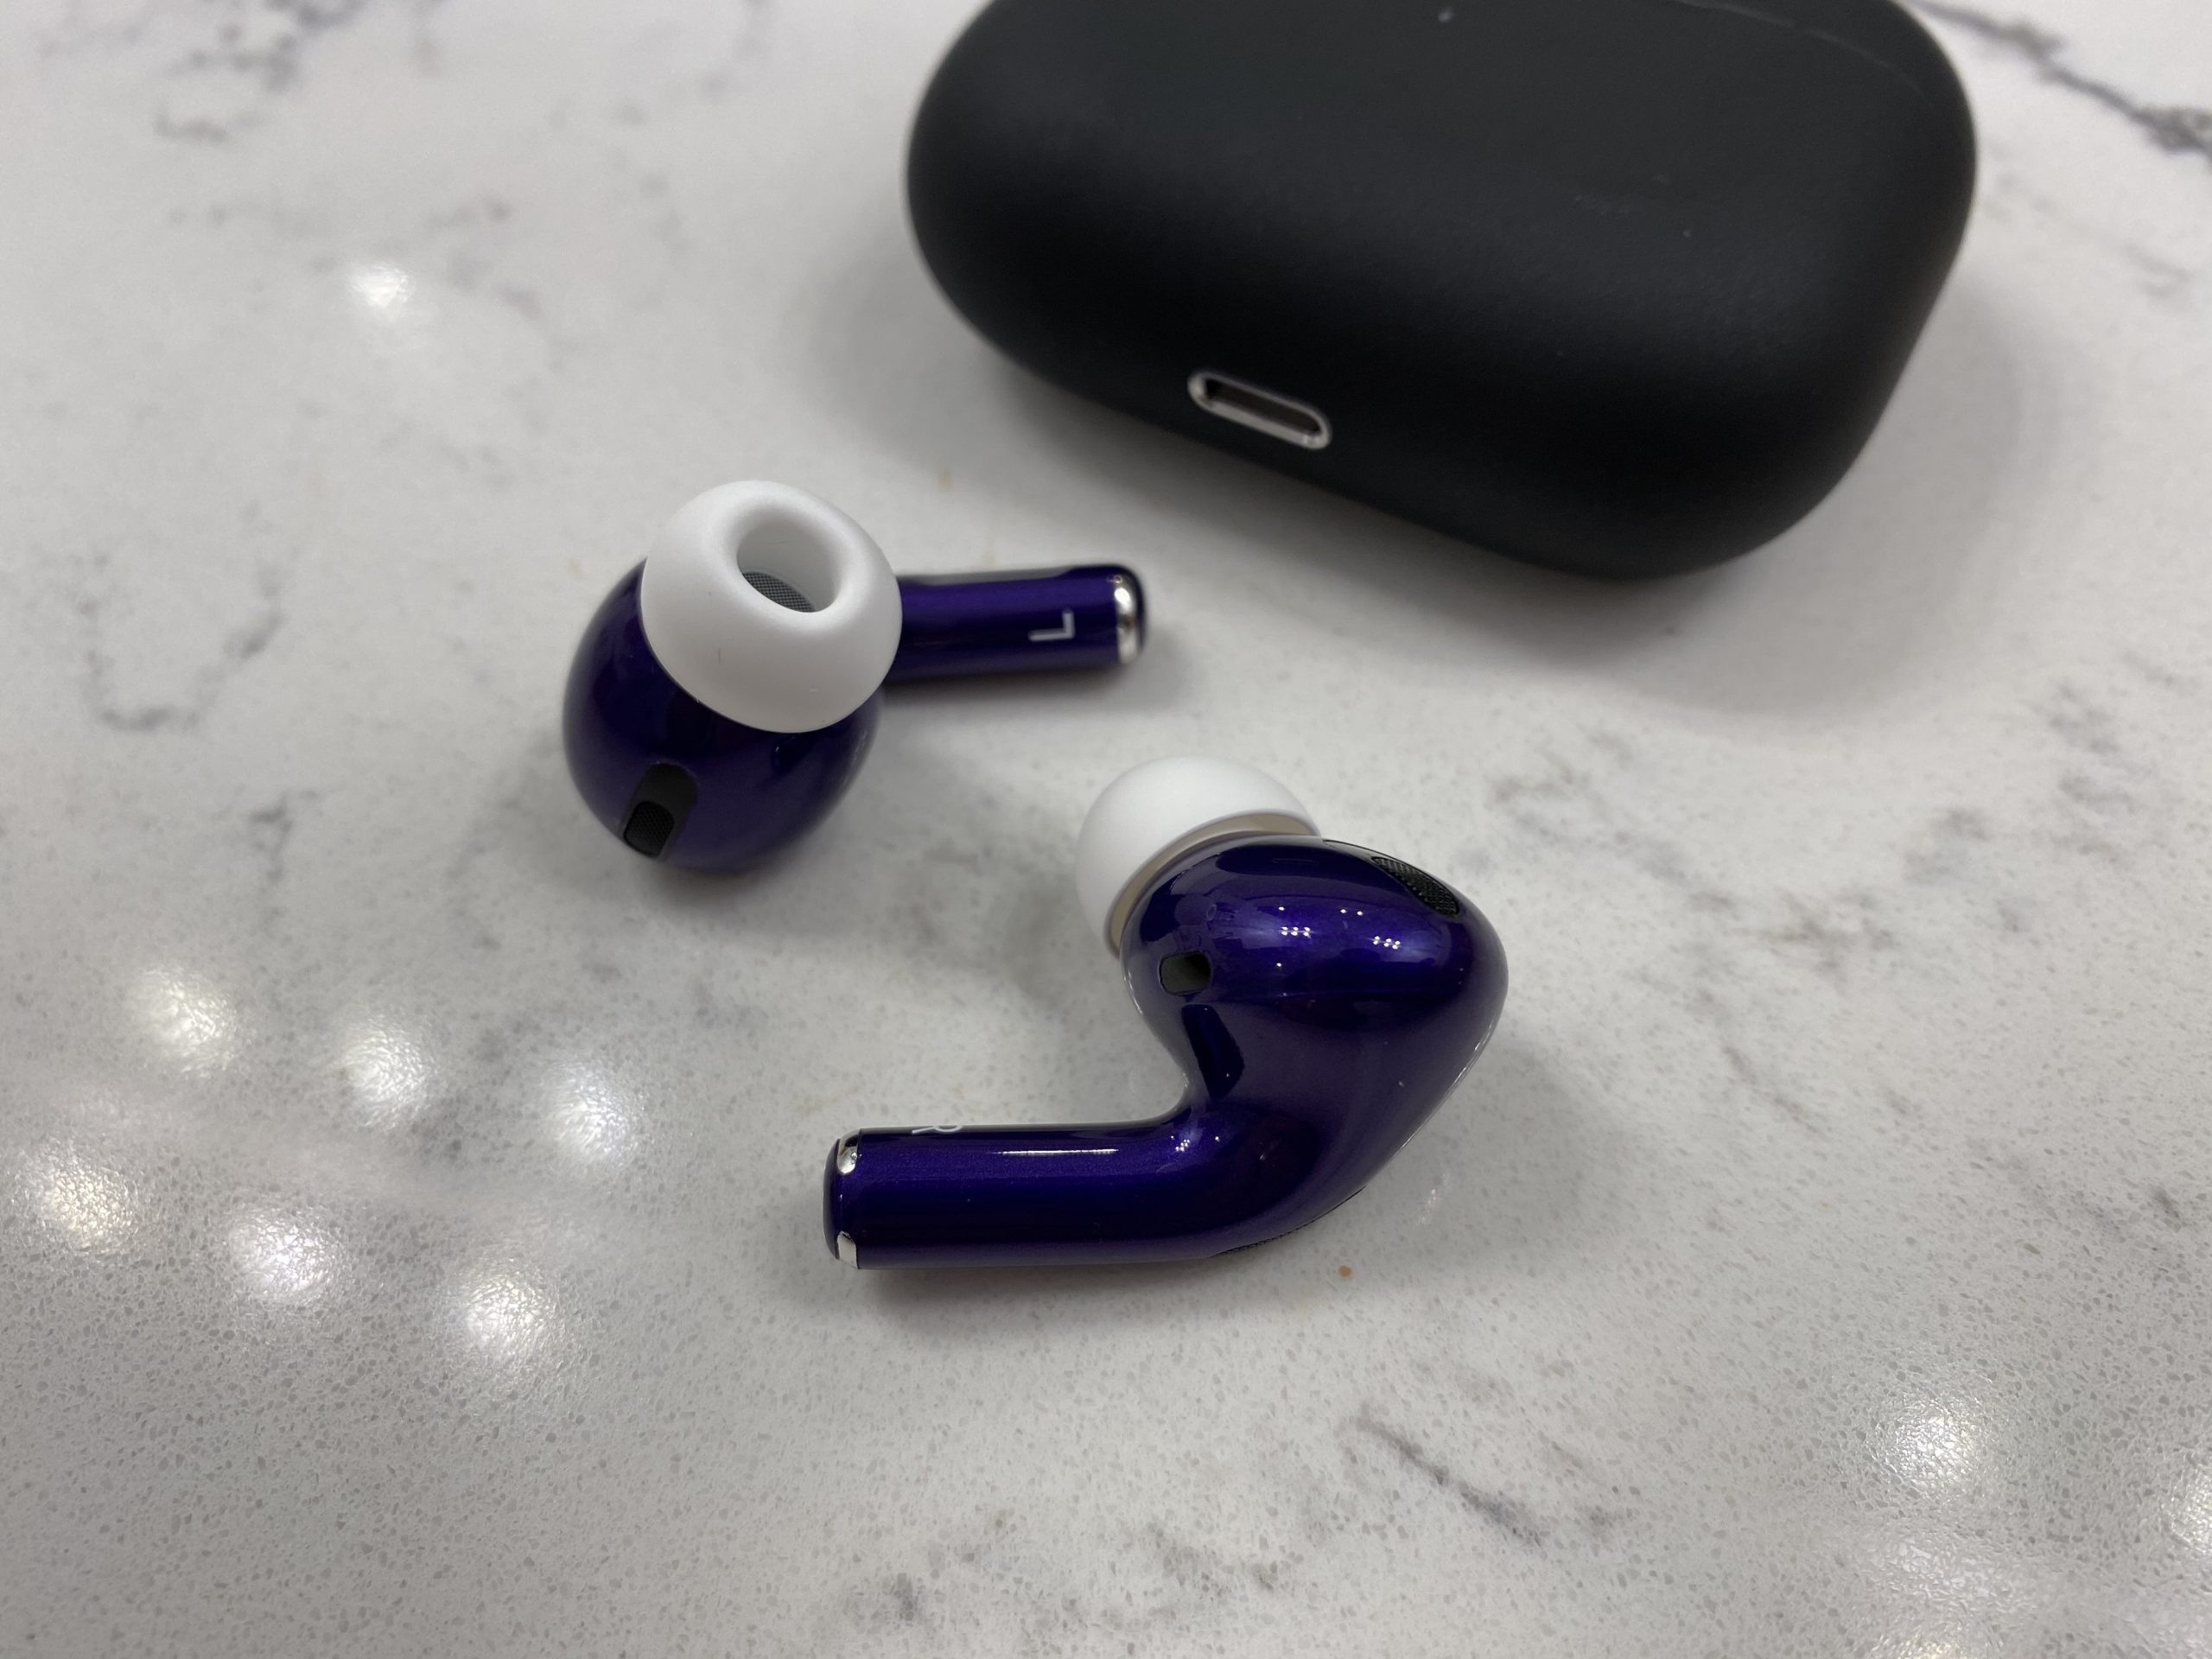 ColorWare is the way to buy incredible custom color AirPods Pro 